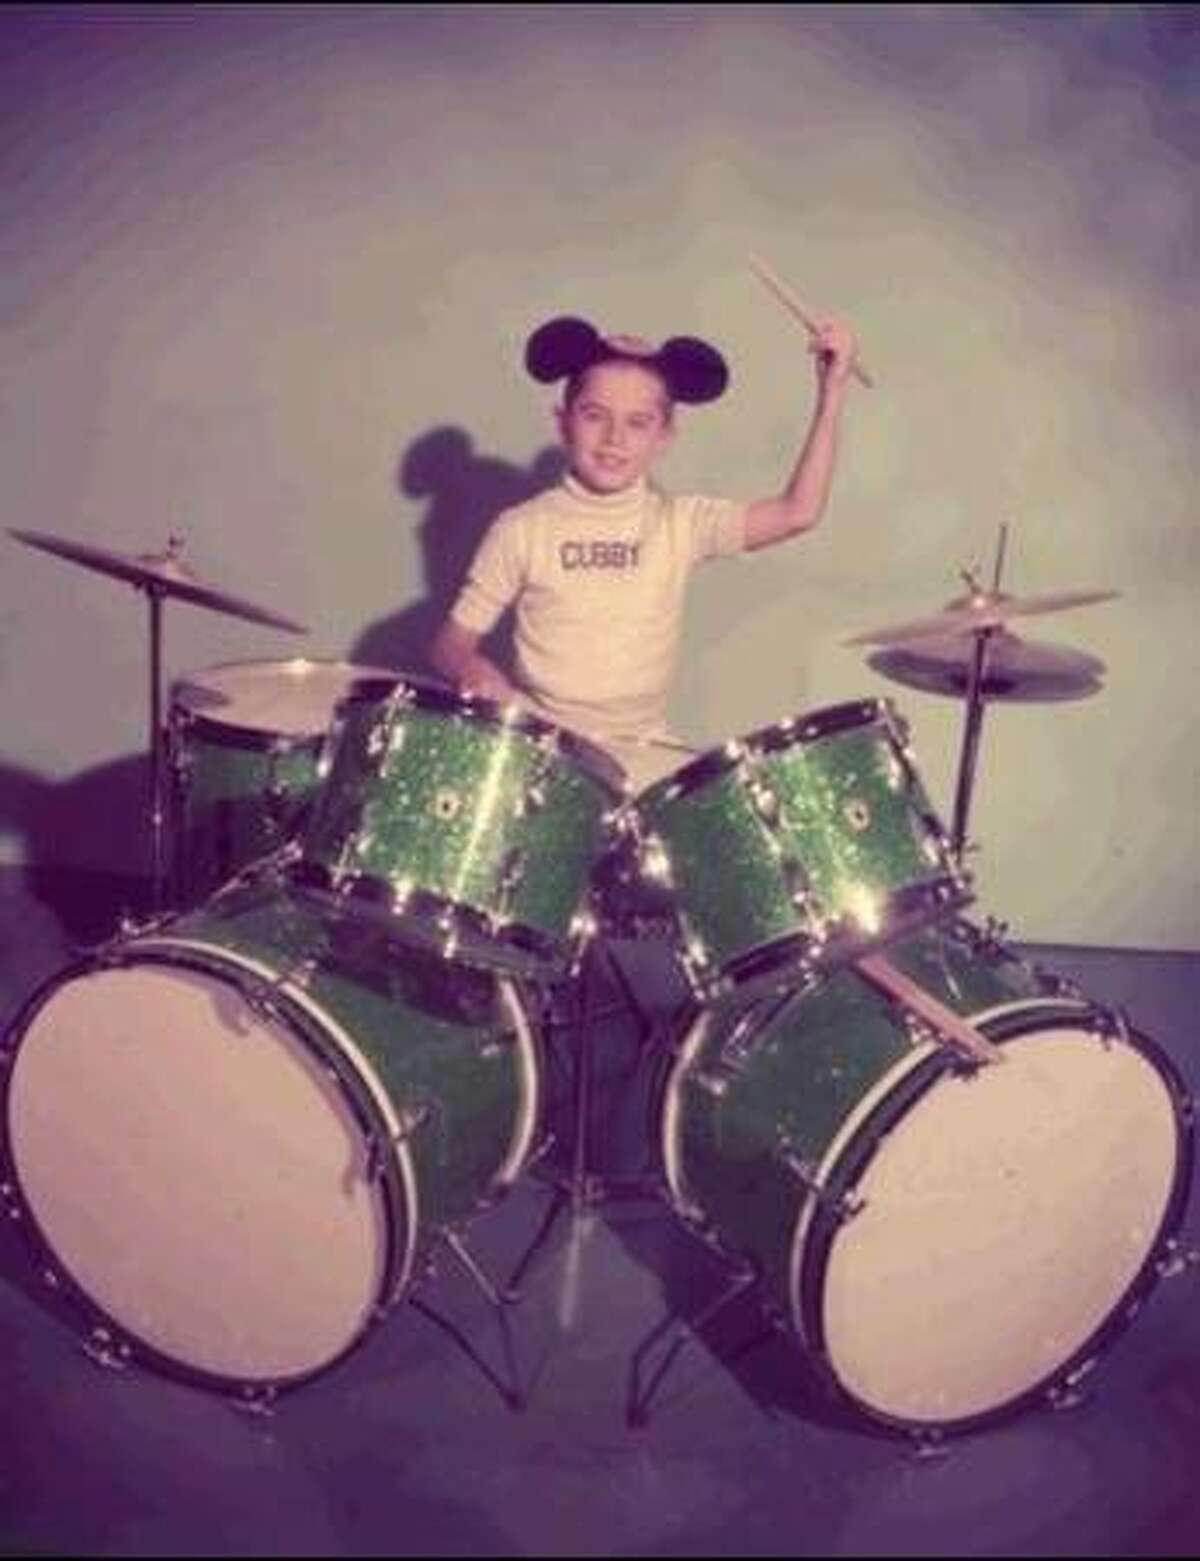 Cubby O'Brien has enjoyed a long and successful career as a drummer since his stint as one of the original Mousketeers